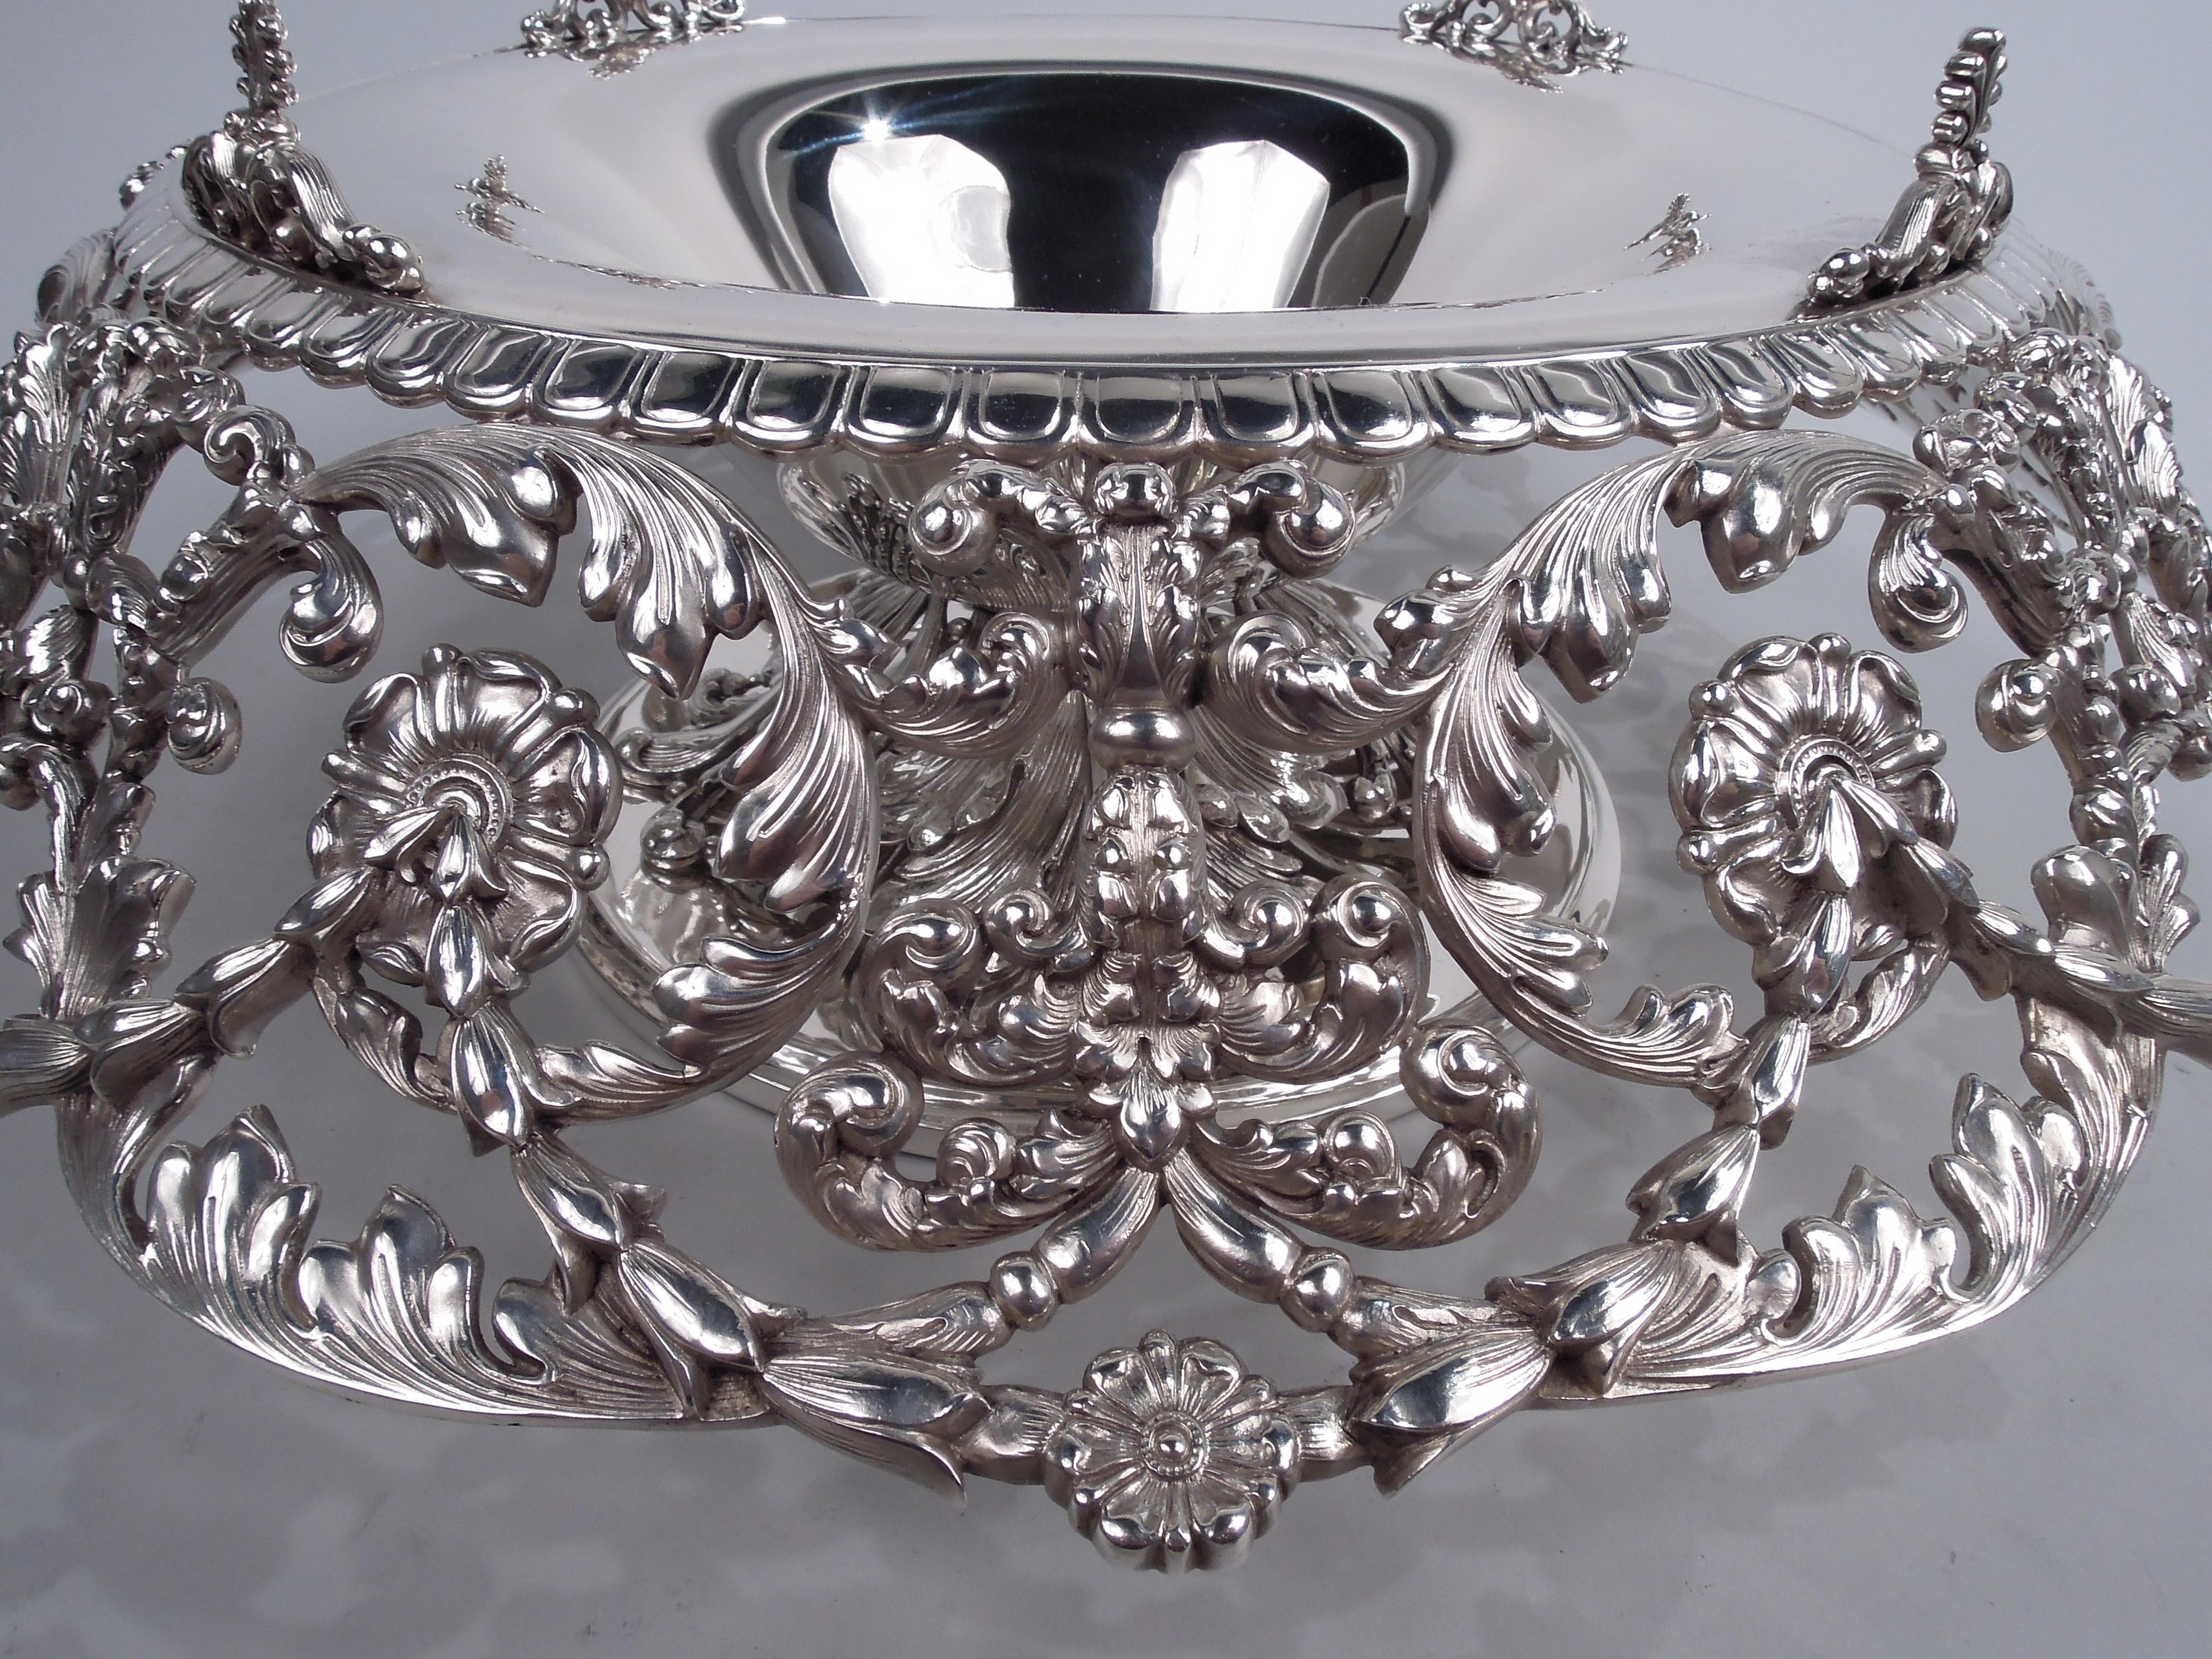 Sumptuous Tiffany Edwardian Classical Sterling Silver Centerpiece Bowl For Sale 1